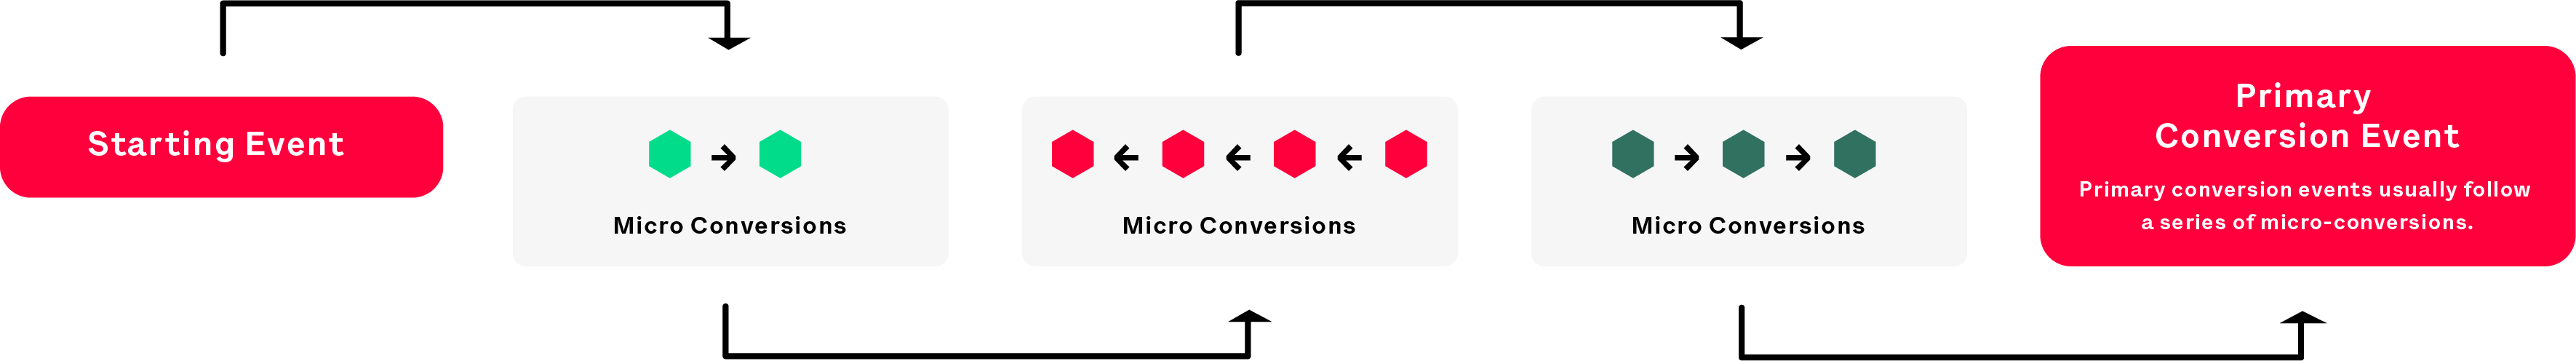 Primary conversion events usually follow a series of micro-conversions.